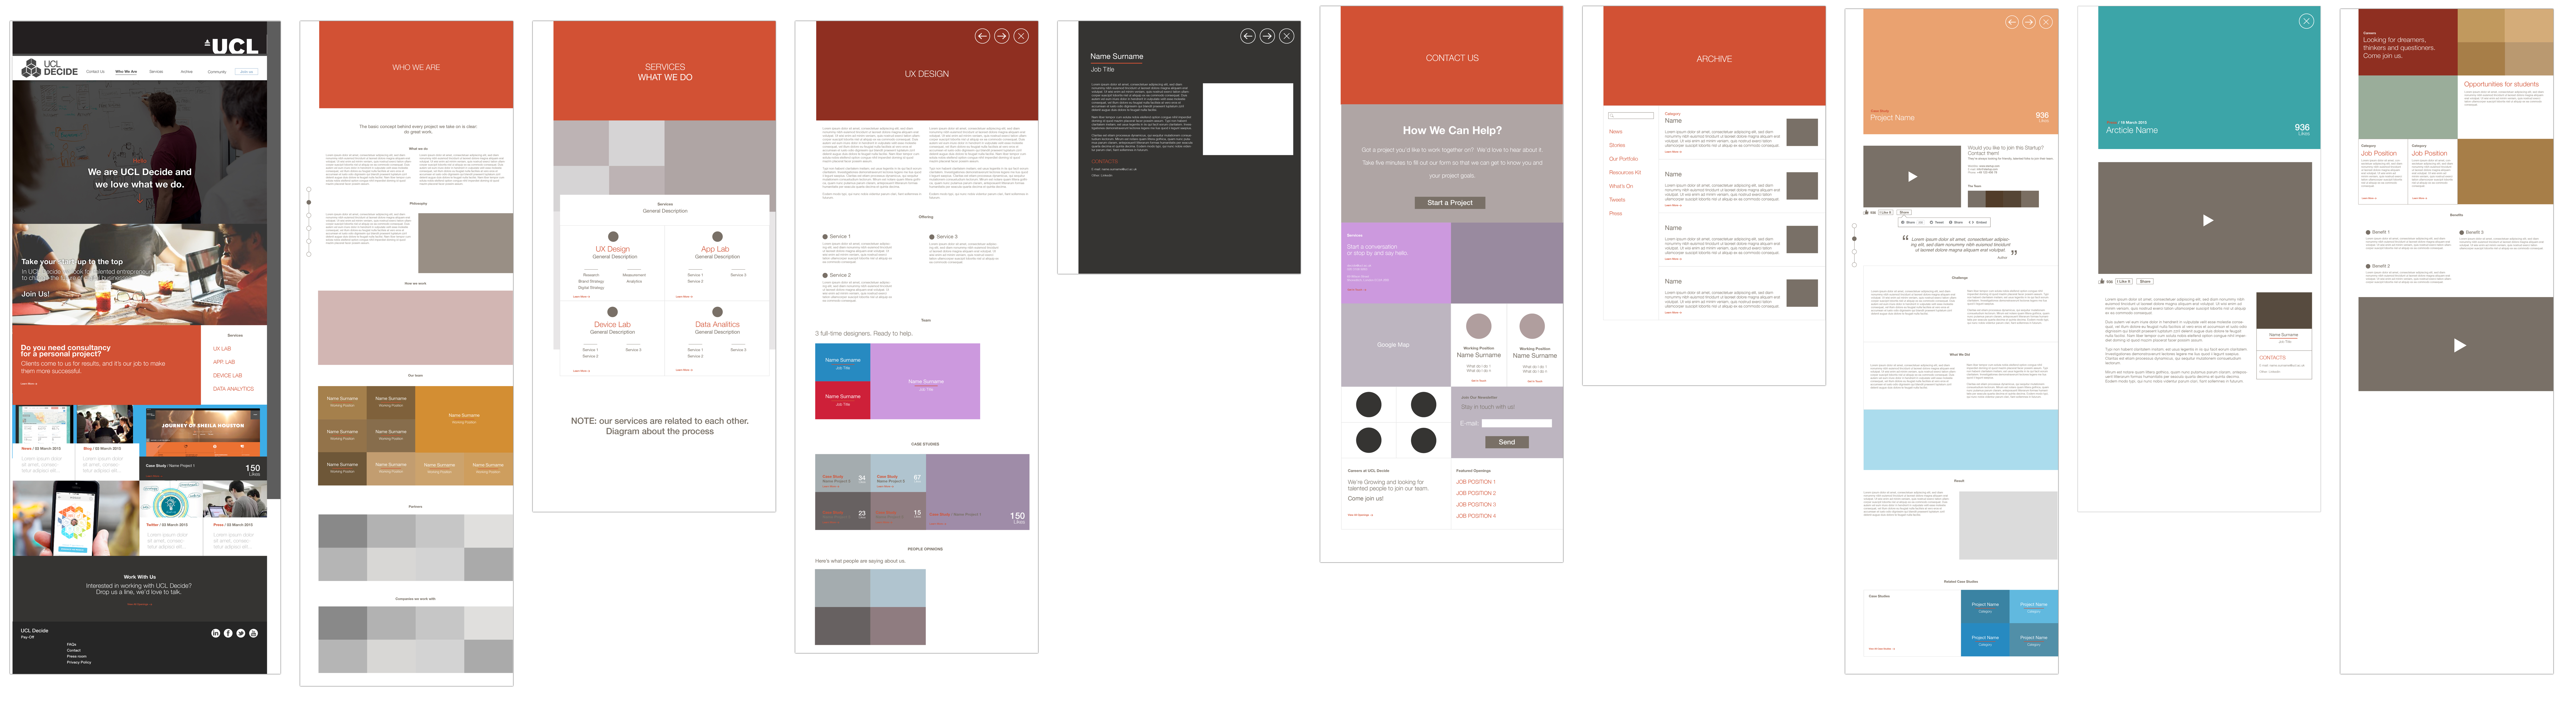 UCL_WireFrames